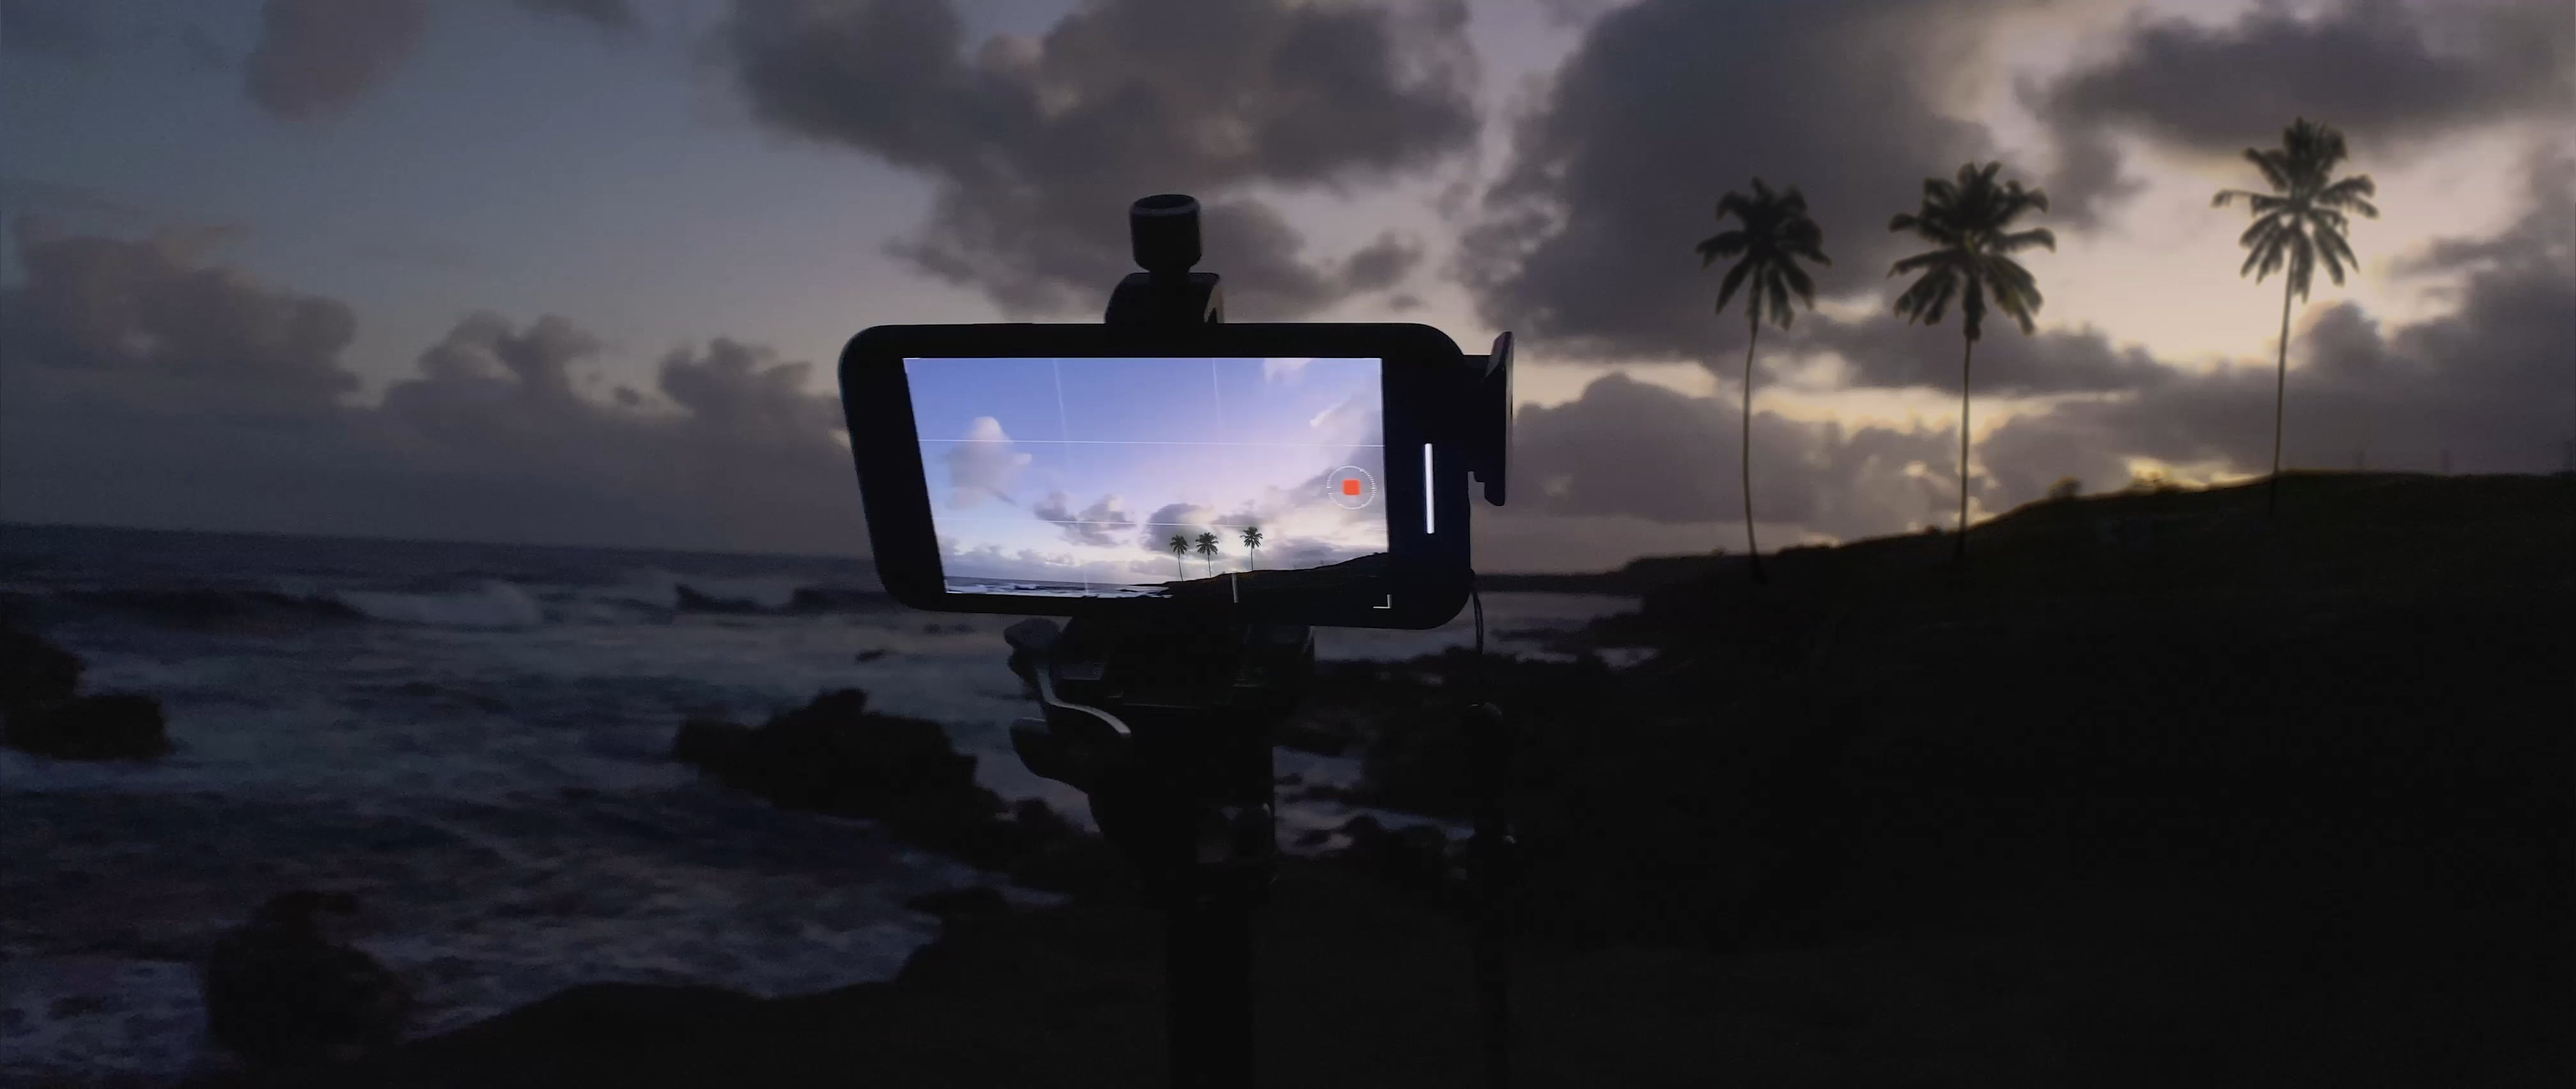 Maui Episode 07: Capturing a Time-lapse Video on an iPhone on Vimeo